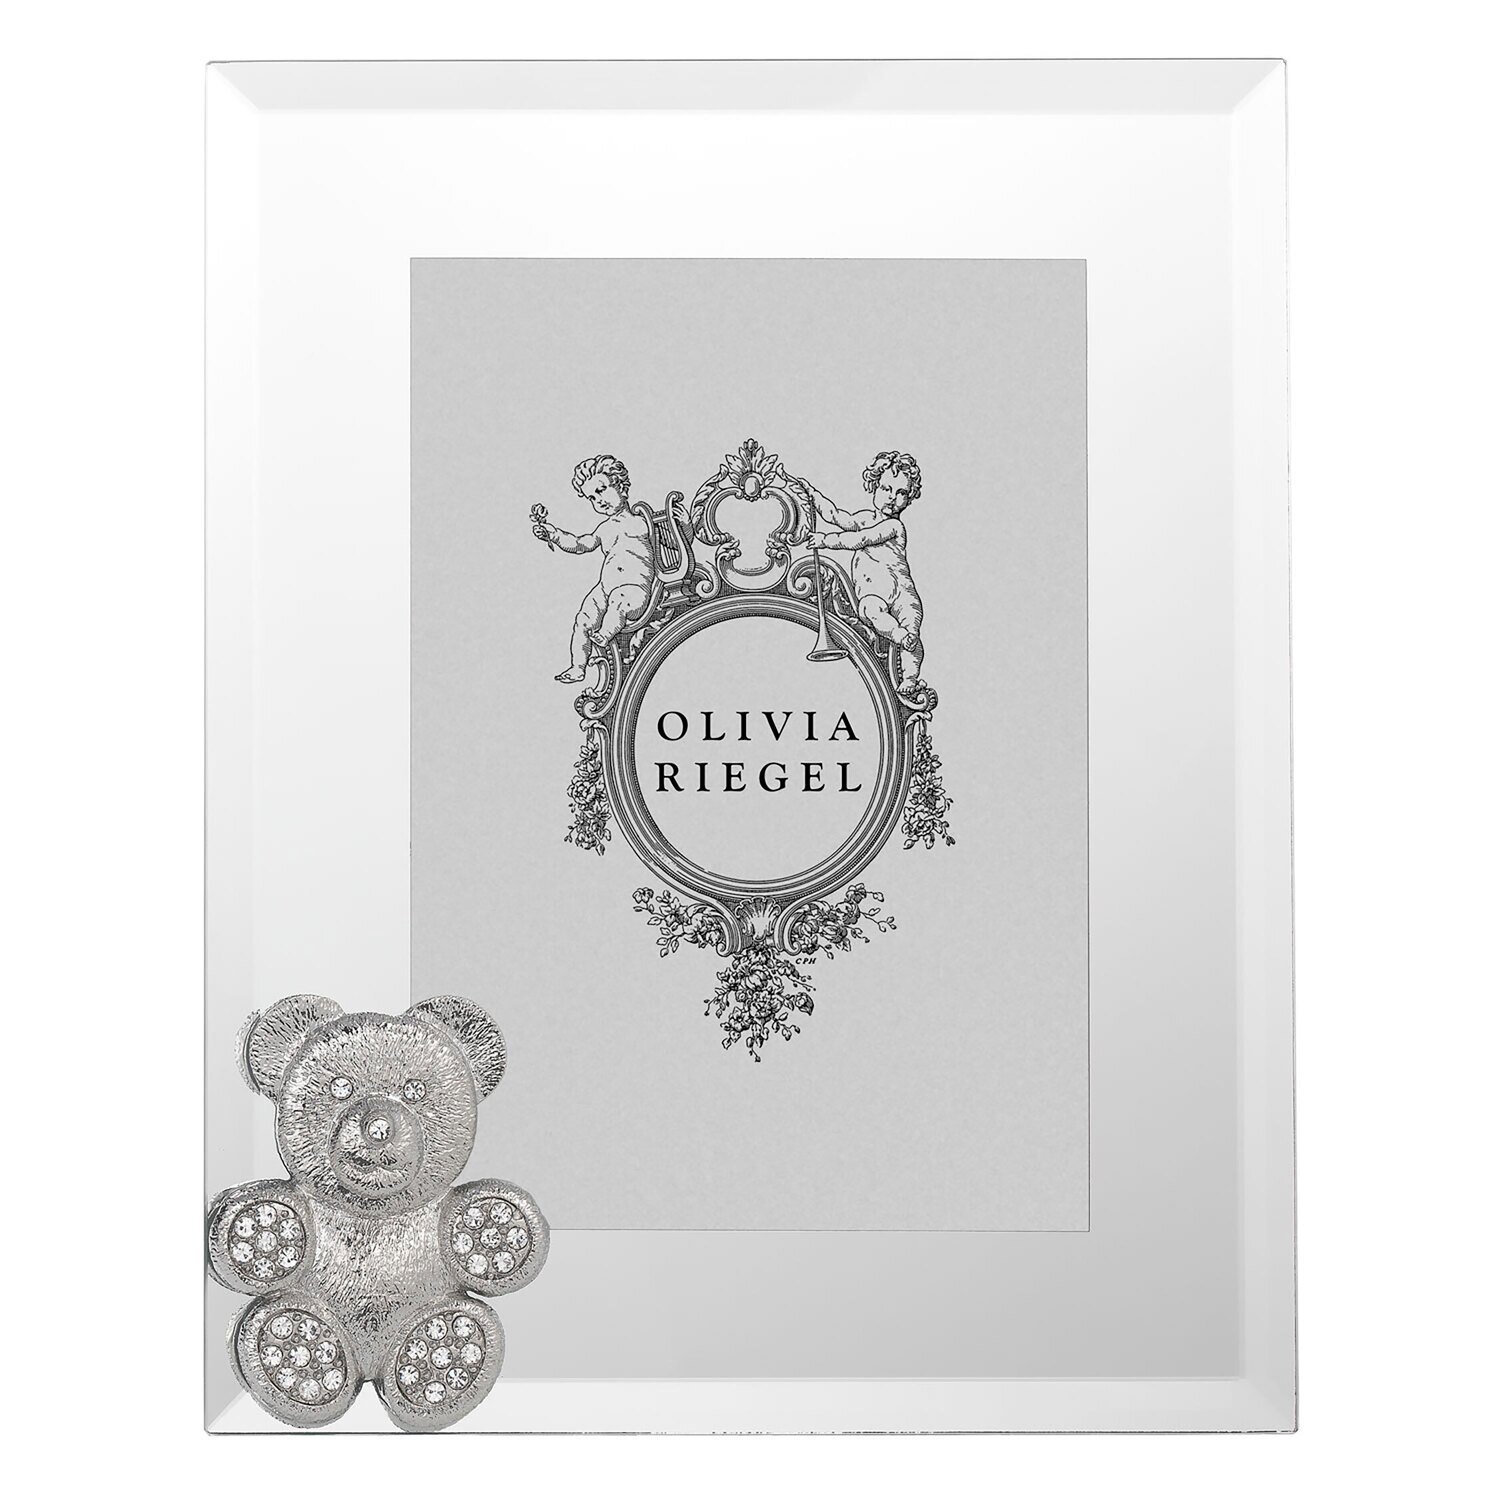 Olivia Riegel Silver Teddy Bear 5 x 7 Inch Picture Frame RT4887